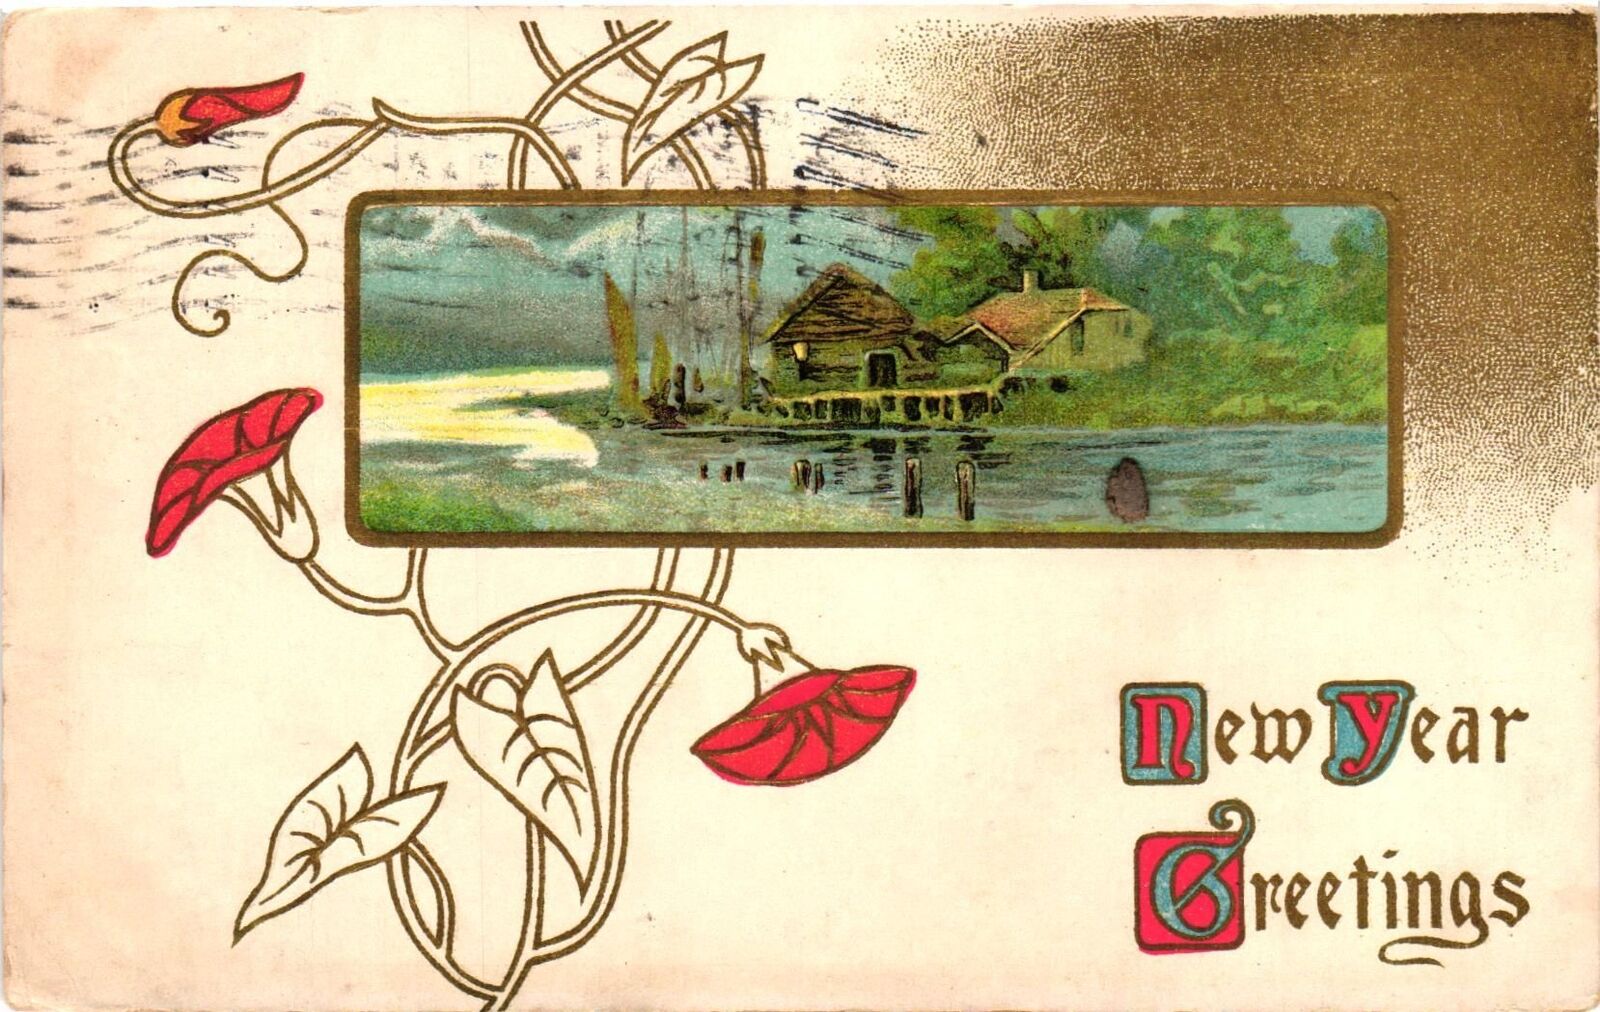 Vintage Postcard- Home by a river, New Year Greetings